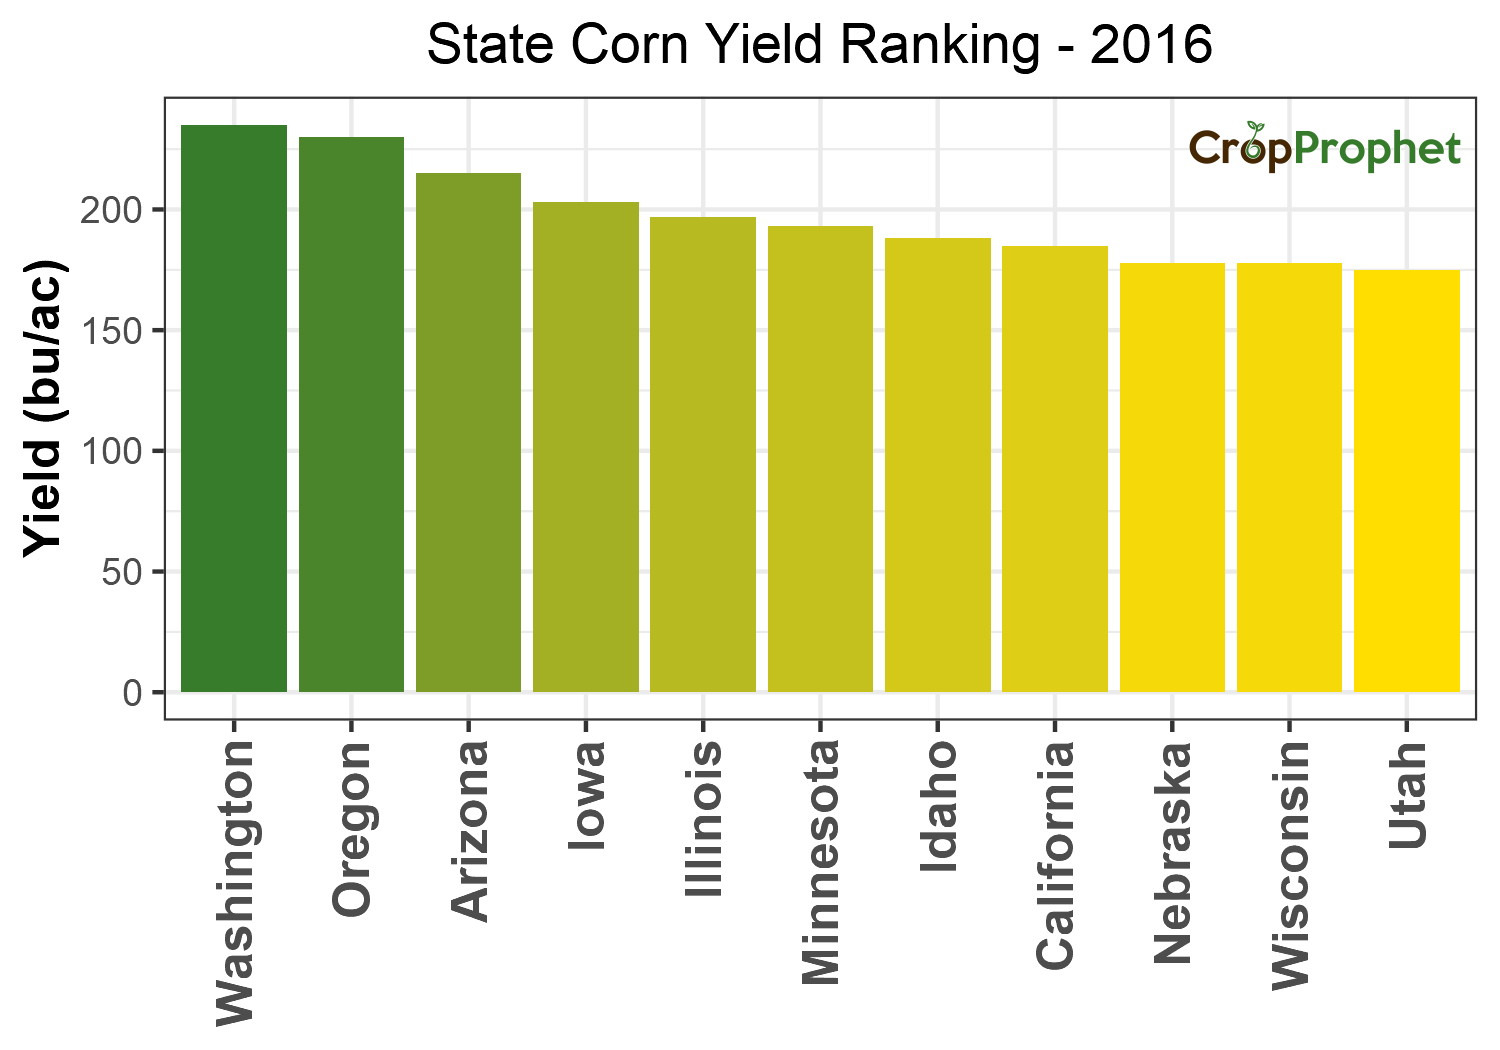 Corn Production by State - 2016 Rankings